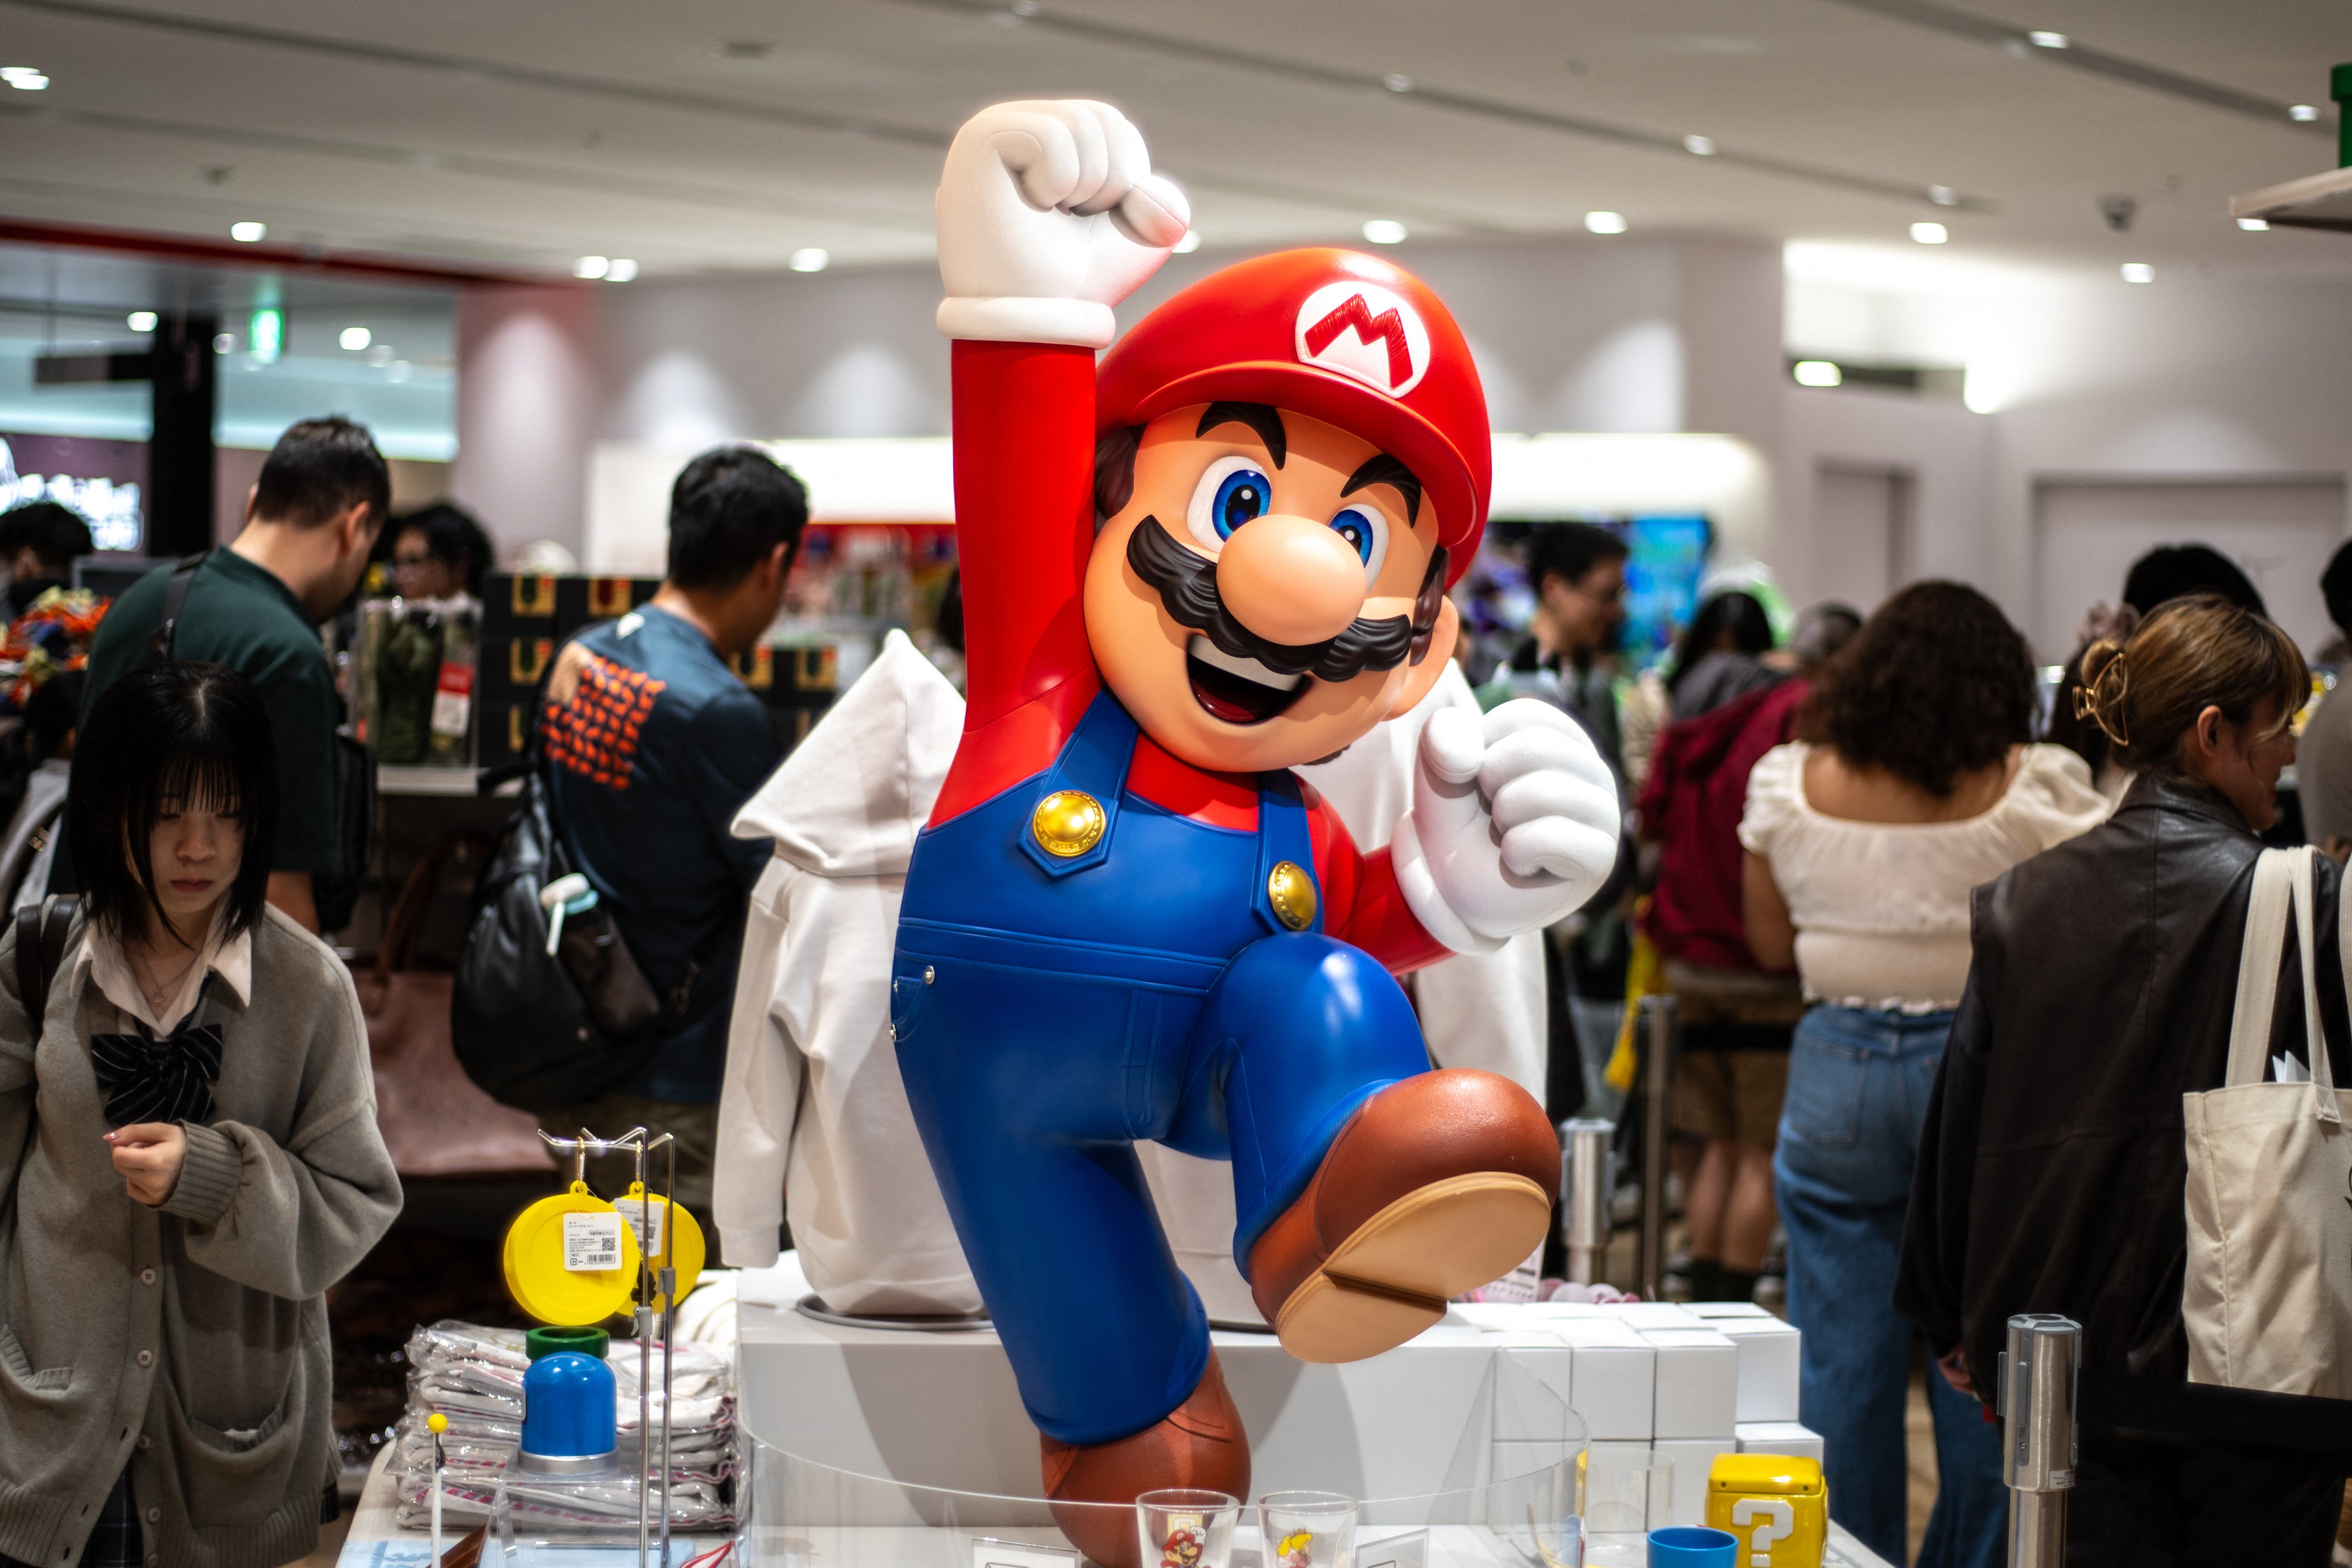 A large Mario statue is center stage, surrounded by bustling people in a store. Mario is in his distinctive red hat and blue overalls, striking a joyful pose.